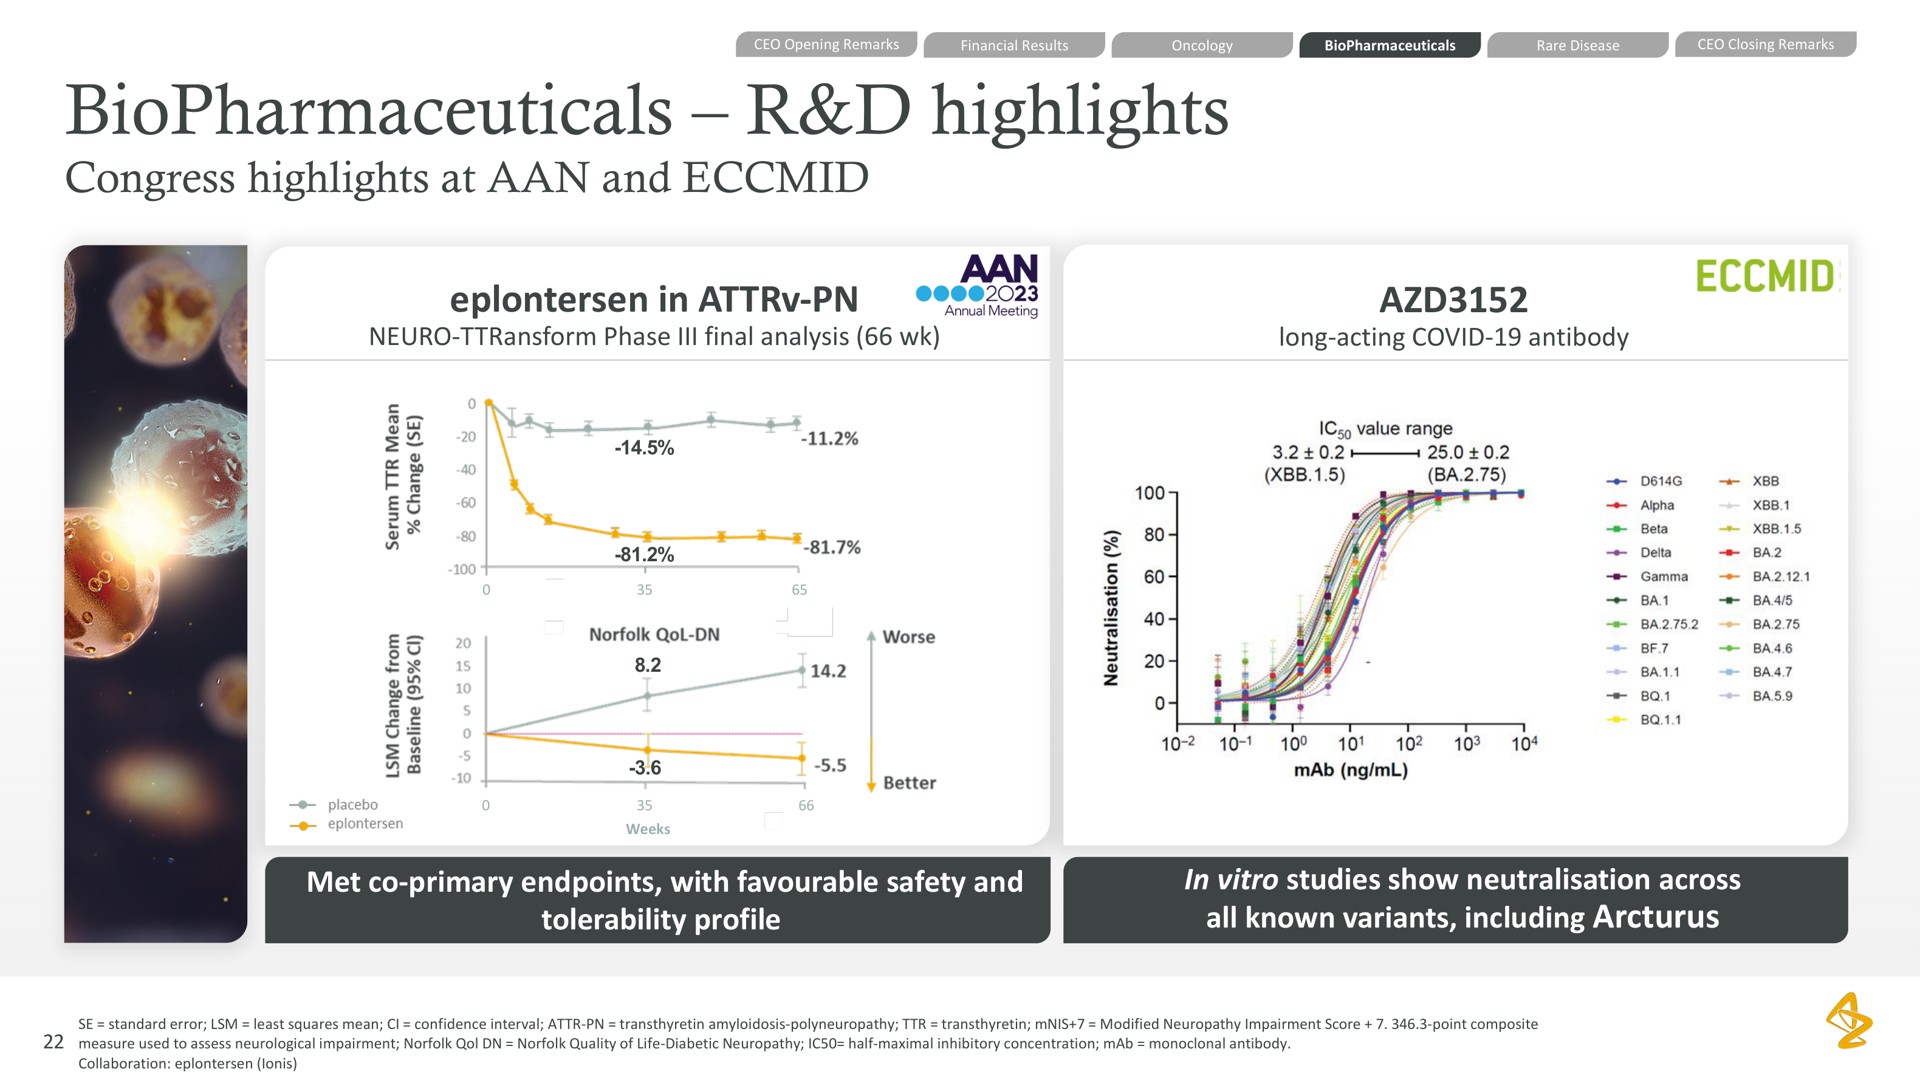 highlights congress highlights at and in met primary with safety and tolerability profile in studies show across all known variants including | AstraZeneca